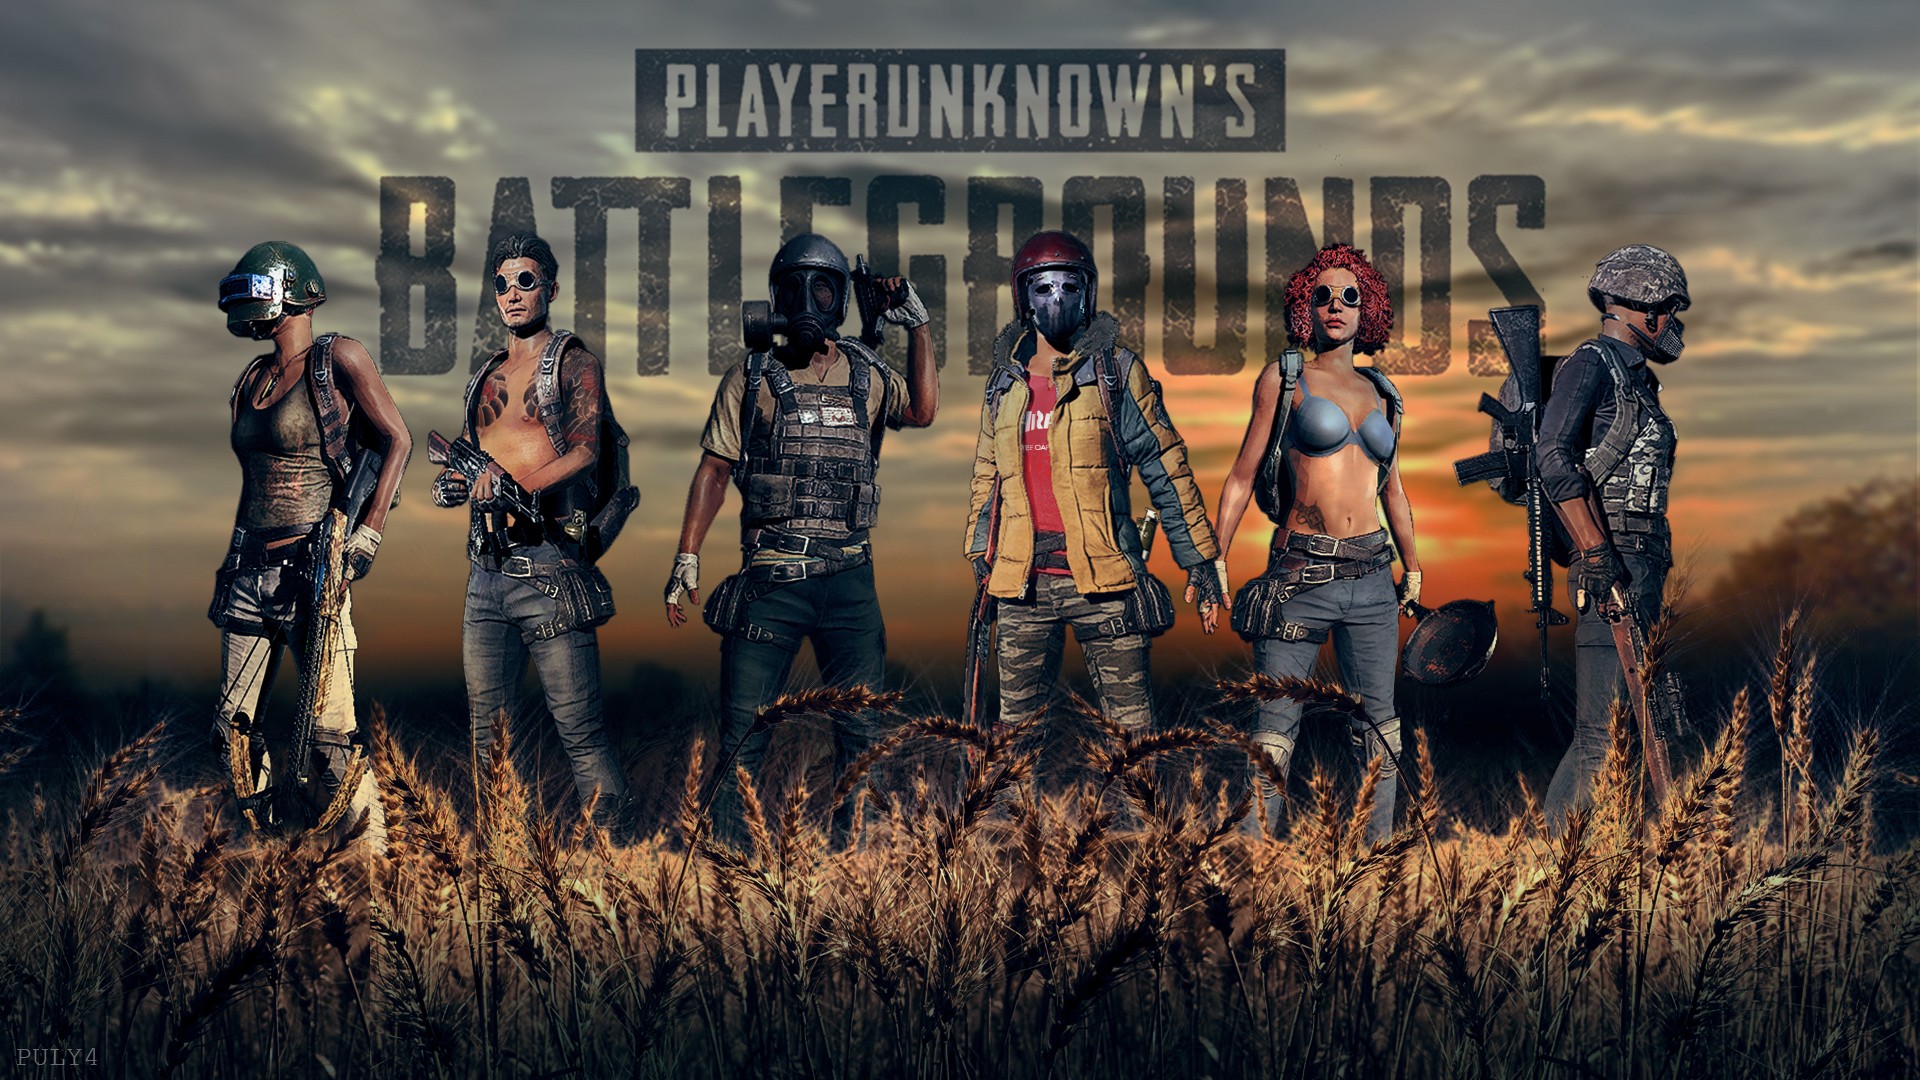 Desktop Wallpaper PUBG with image resolution 1920x1080 pixel. You can use this wallpaper as background for your desktop Computer Screensavers, Android or iPhone smartphones